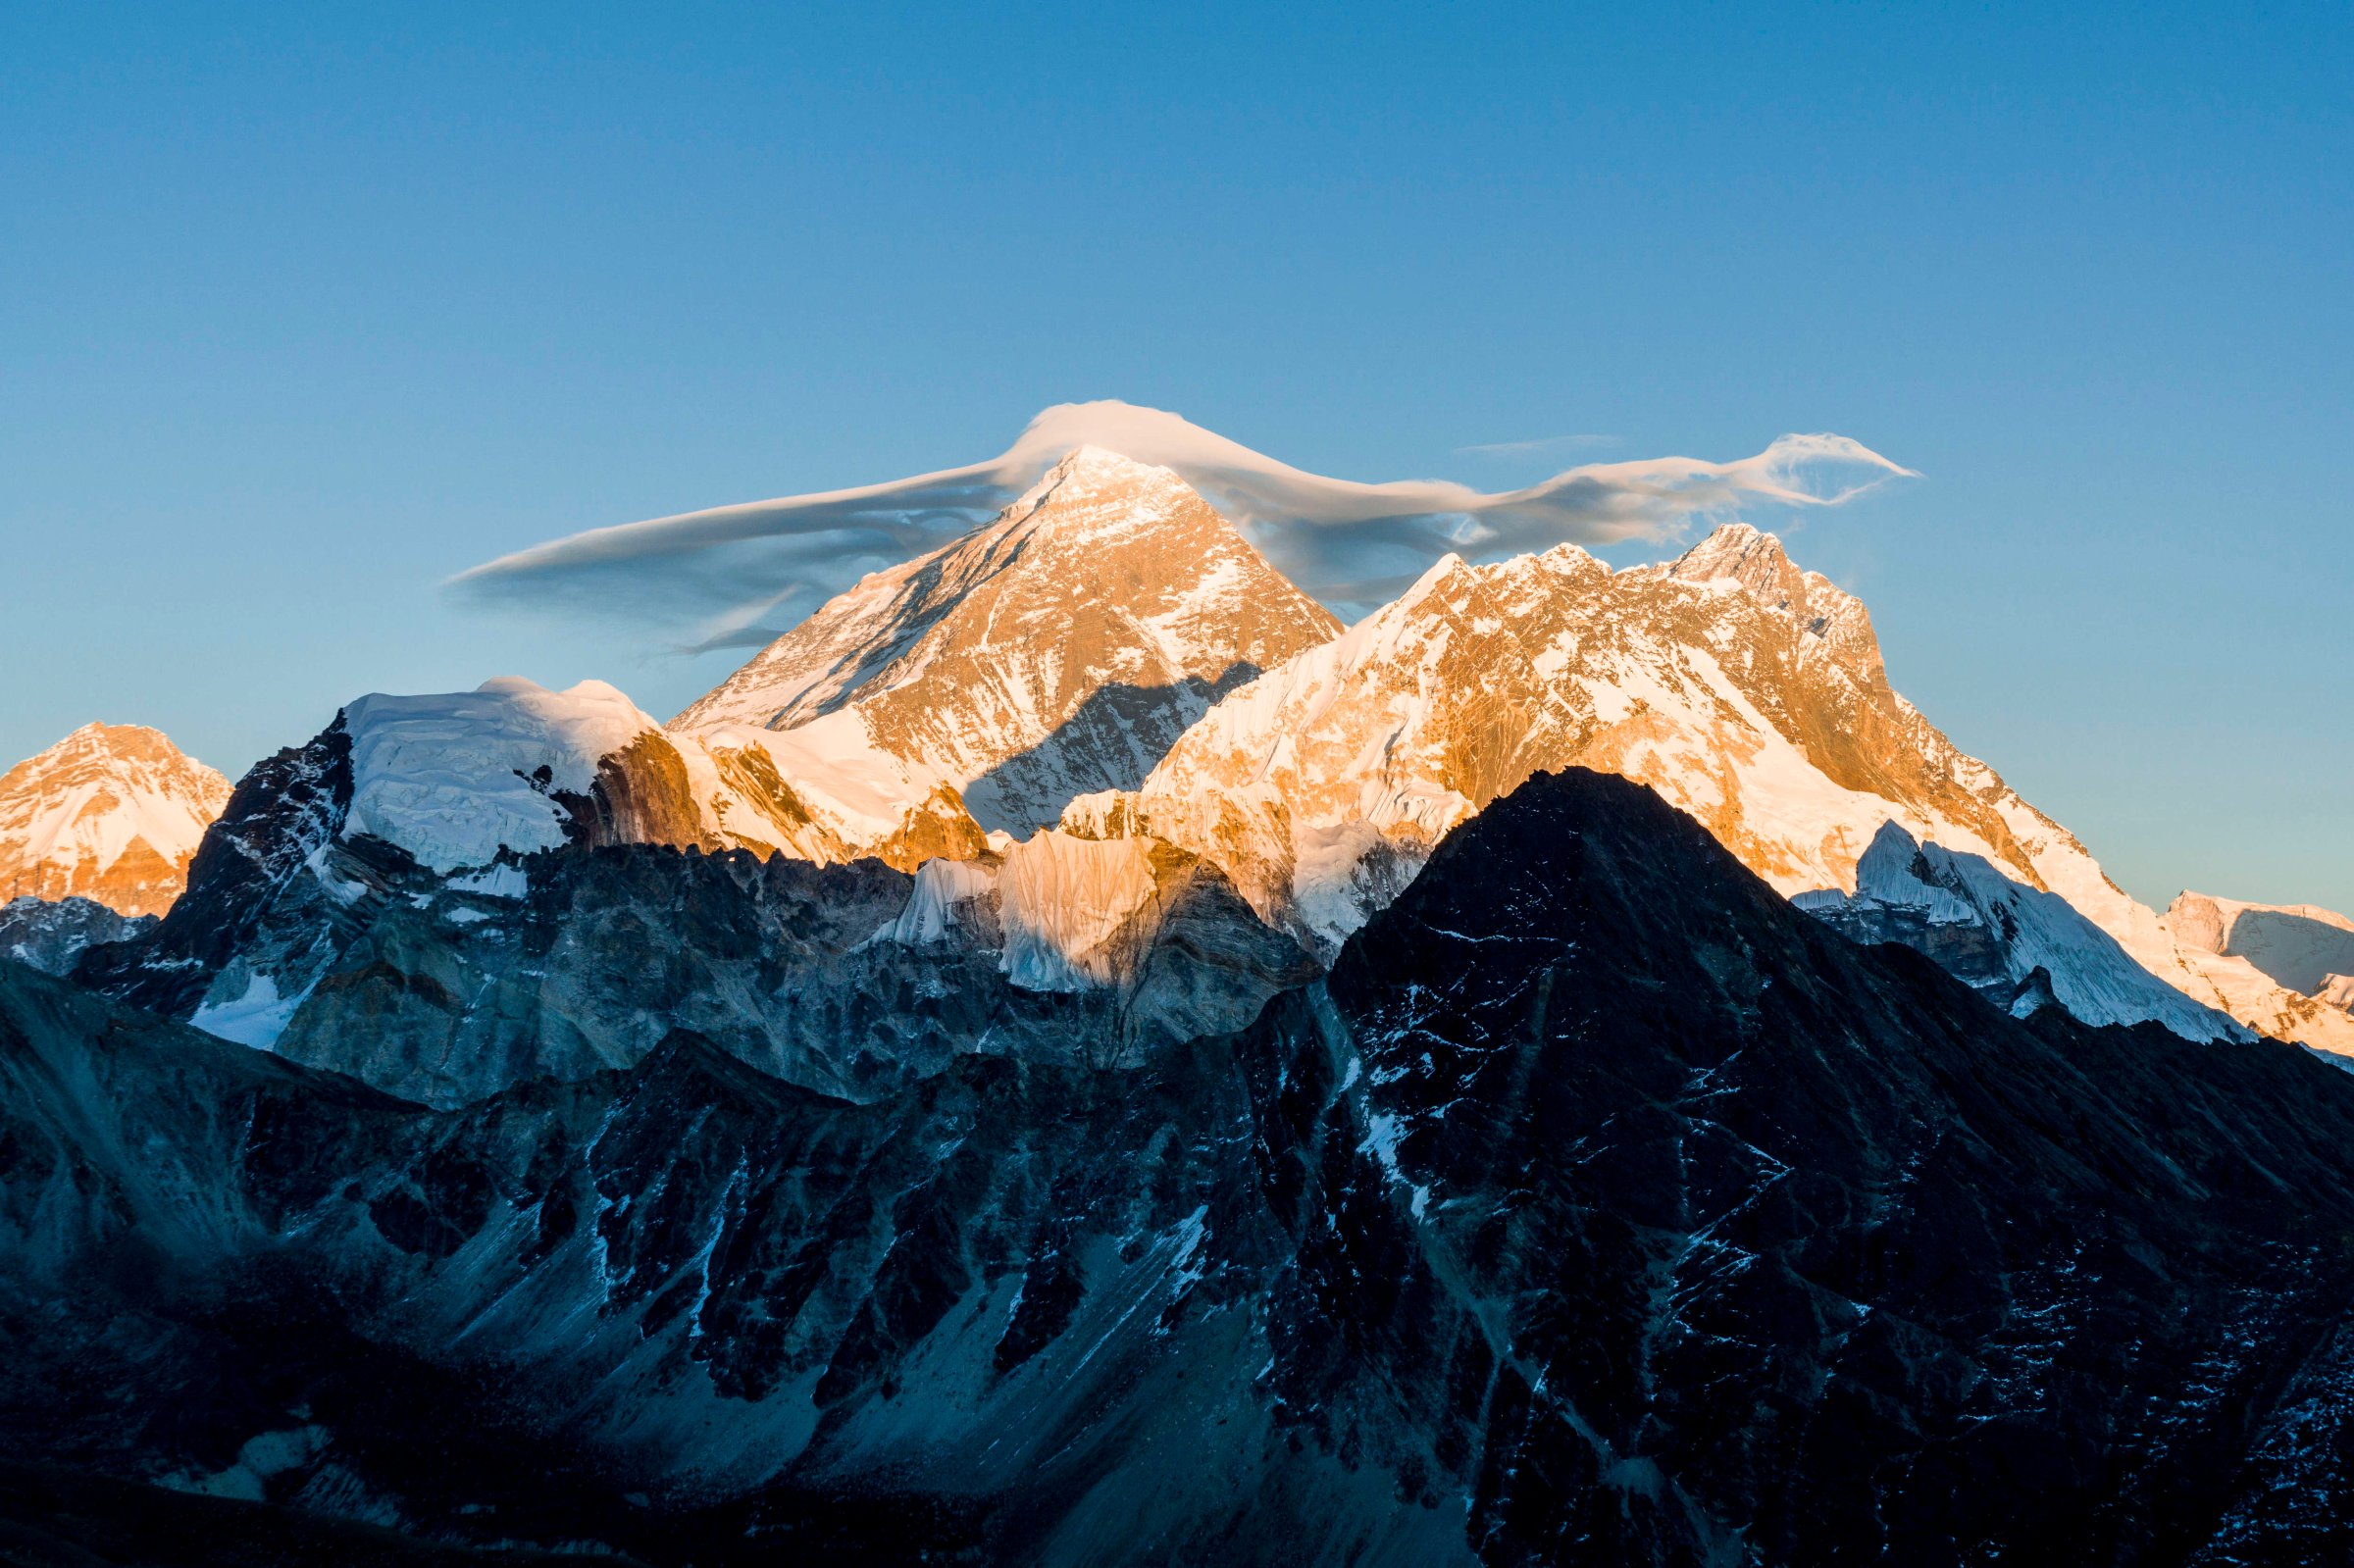 The mountain Mt. Everest (8848m) with a white cloud on top,